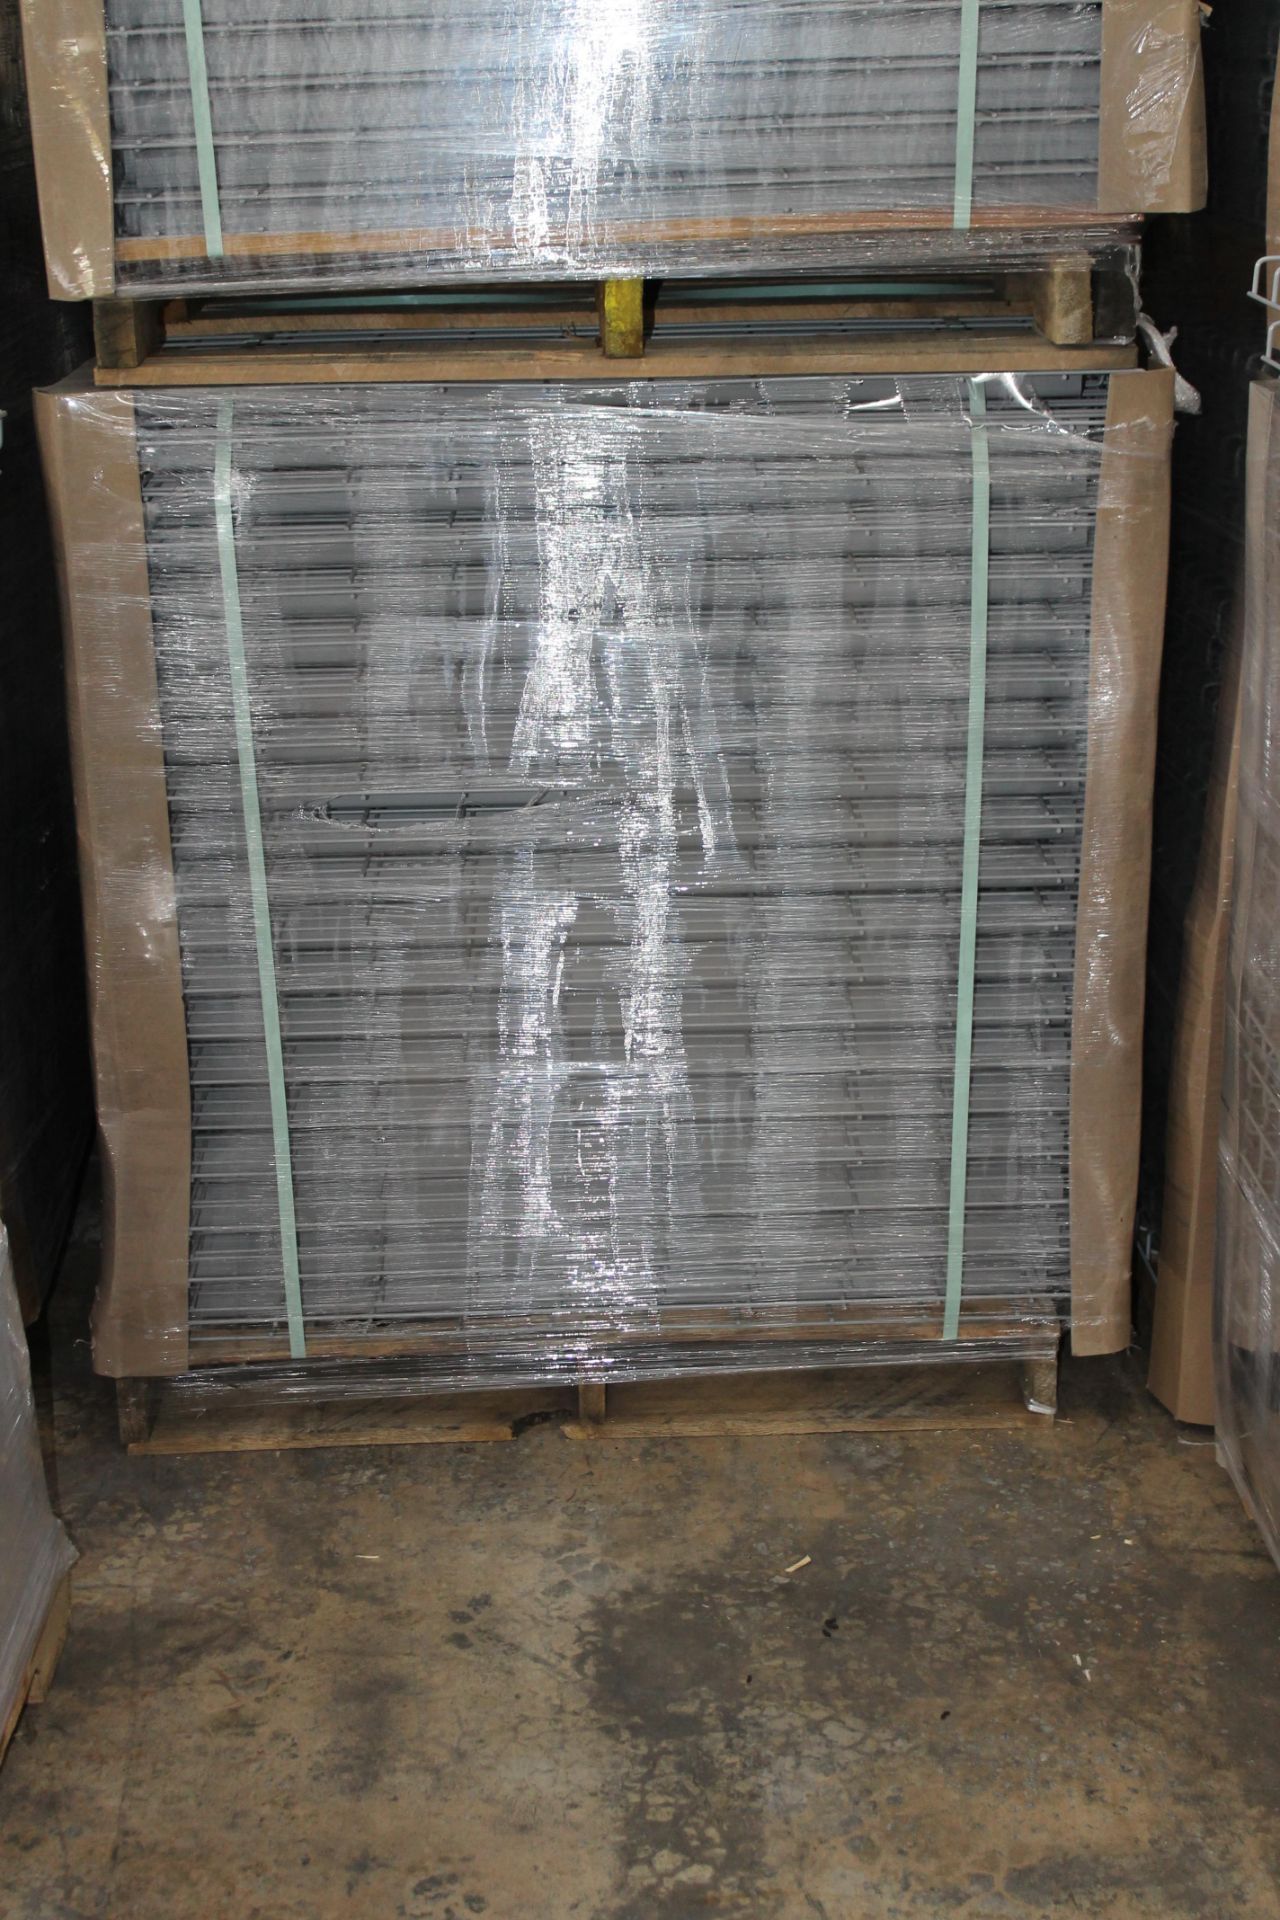 NEW 120 PCS OF STANDARD 42" X 46" WIREDECK - 2200 LBS CAPACITY